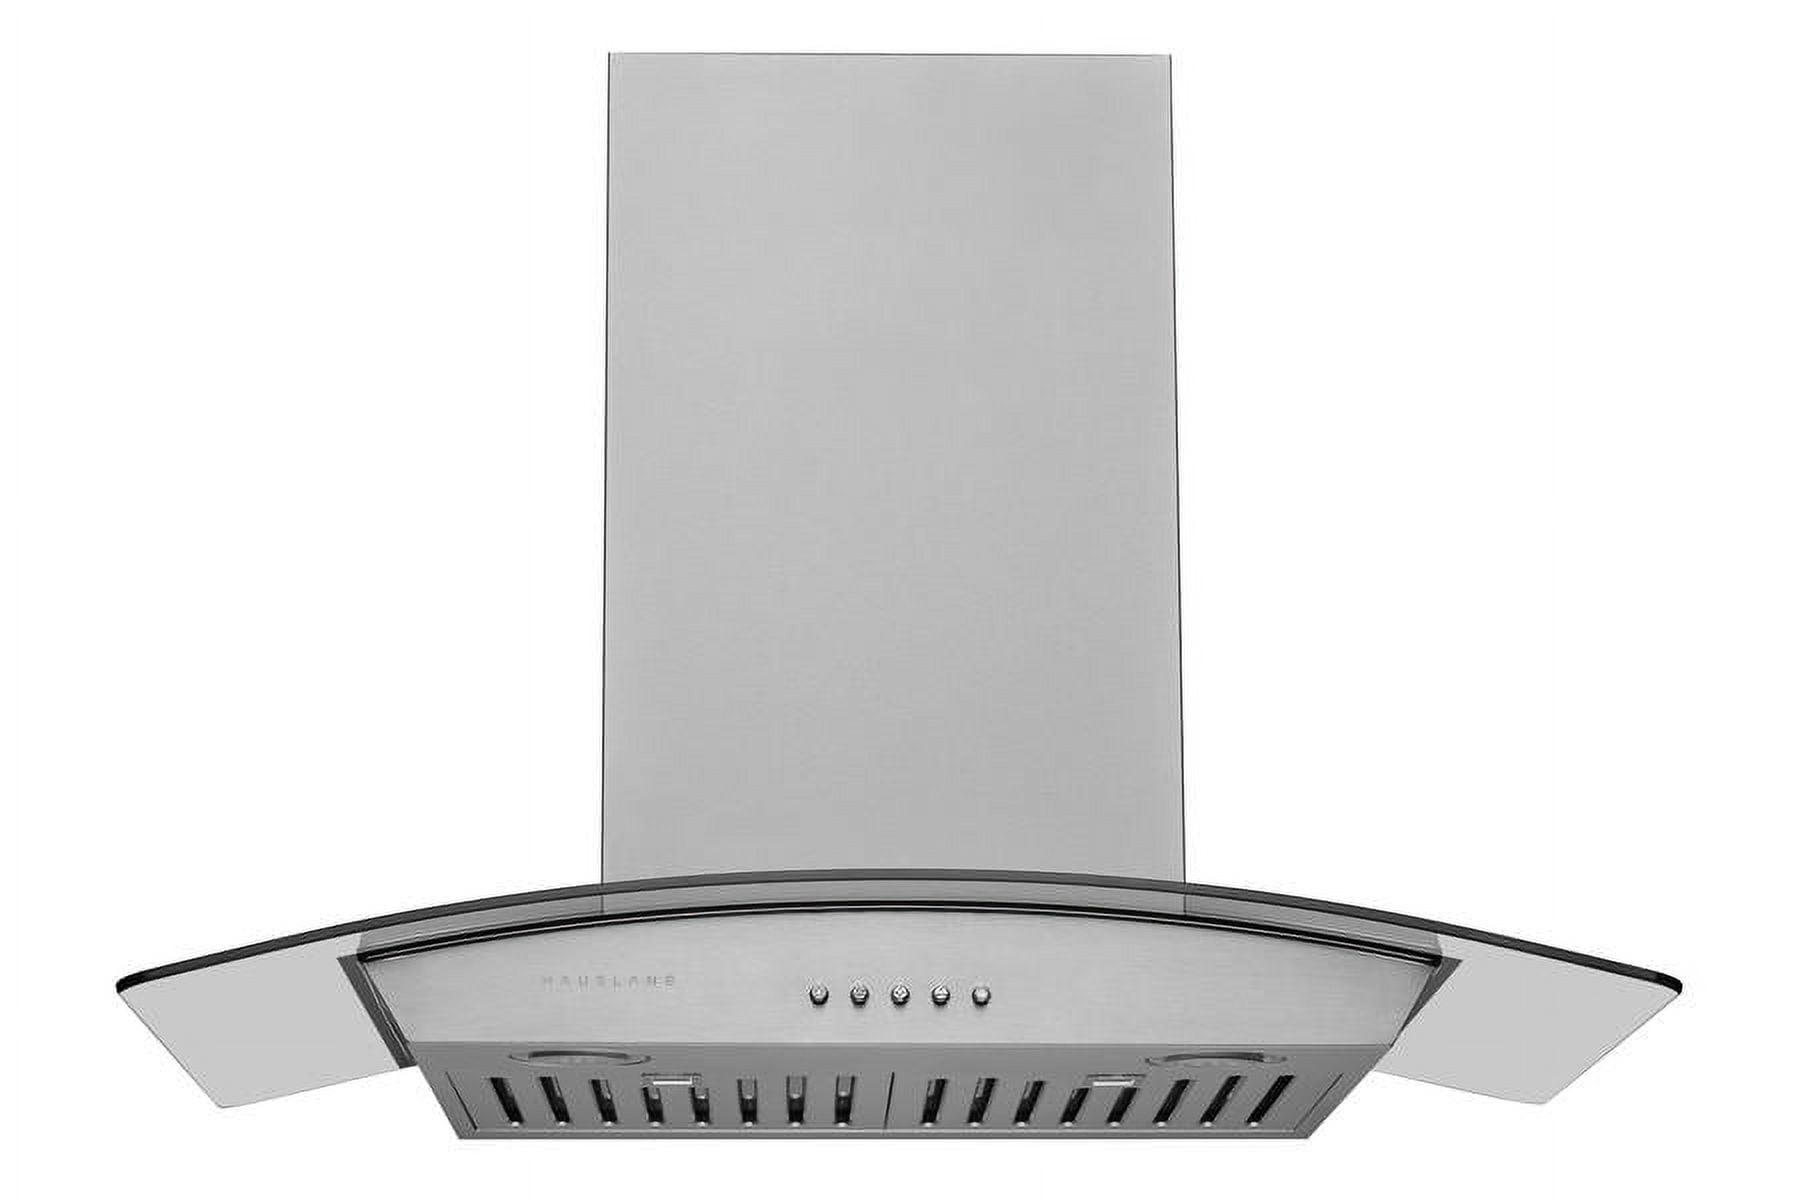 Range Hood 30 inch Under Cabinet,Black Stainless Steel Range Hood with 500  CFM,Ductless Range Hood Black,Kitchen Vent Hood 30 inch with 3 Way  Venting,Baffle Filters,LED Light 